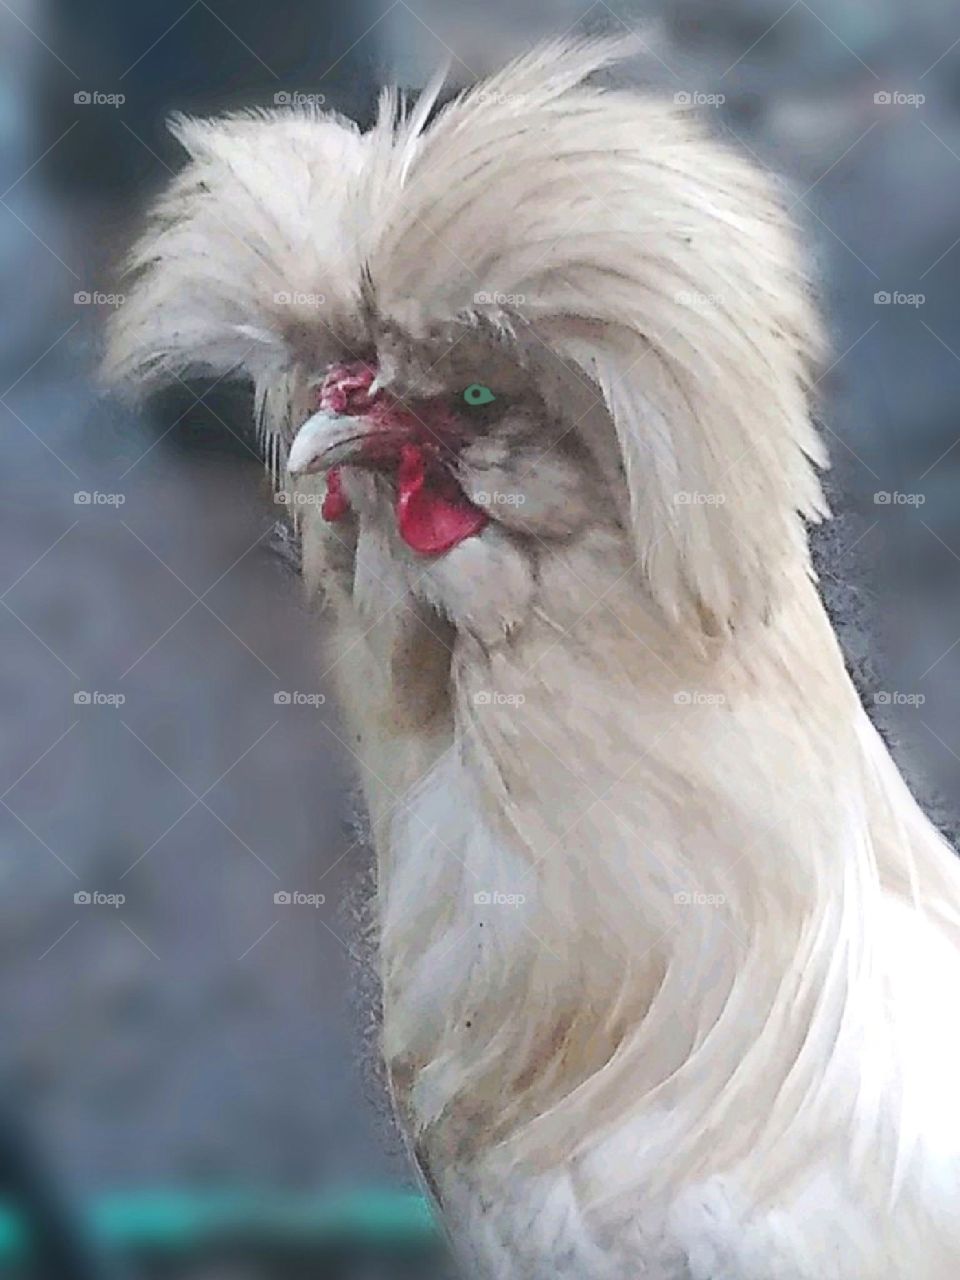 My favorite rooster, "Bird.". He is a Polish Chicken.